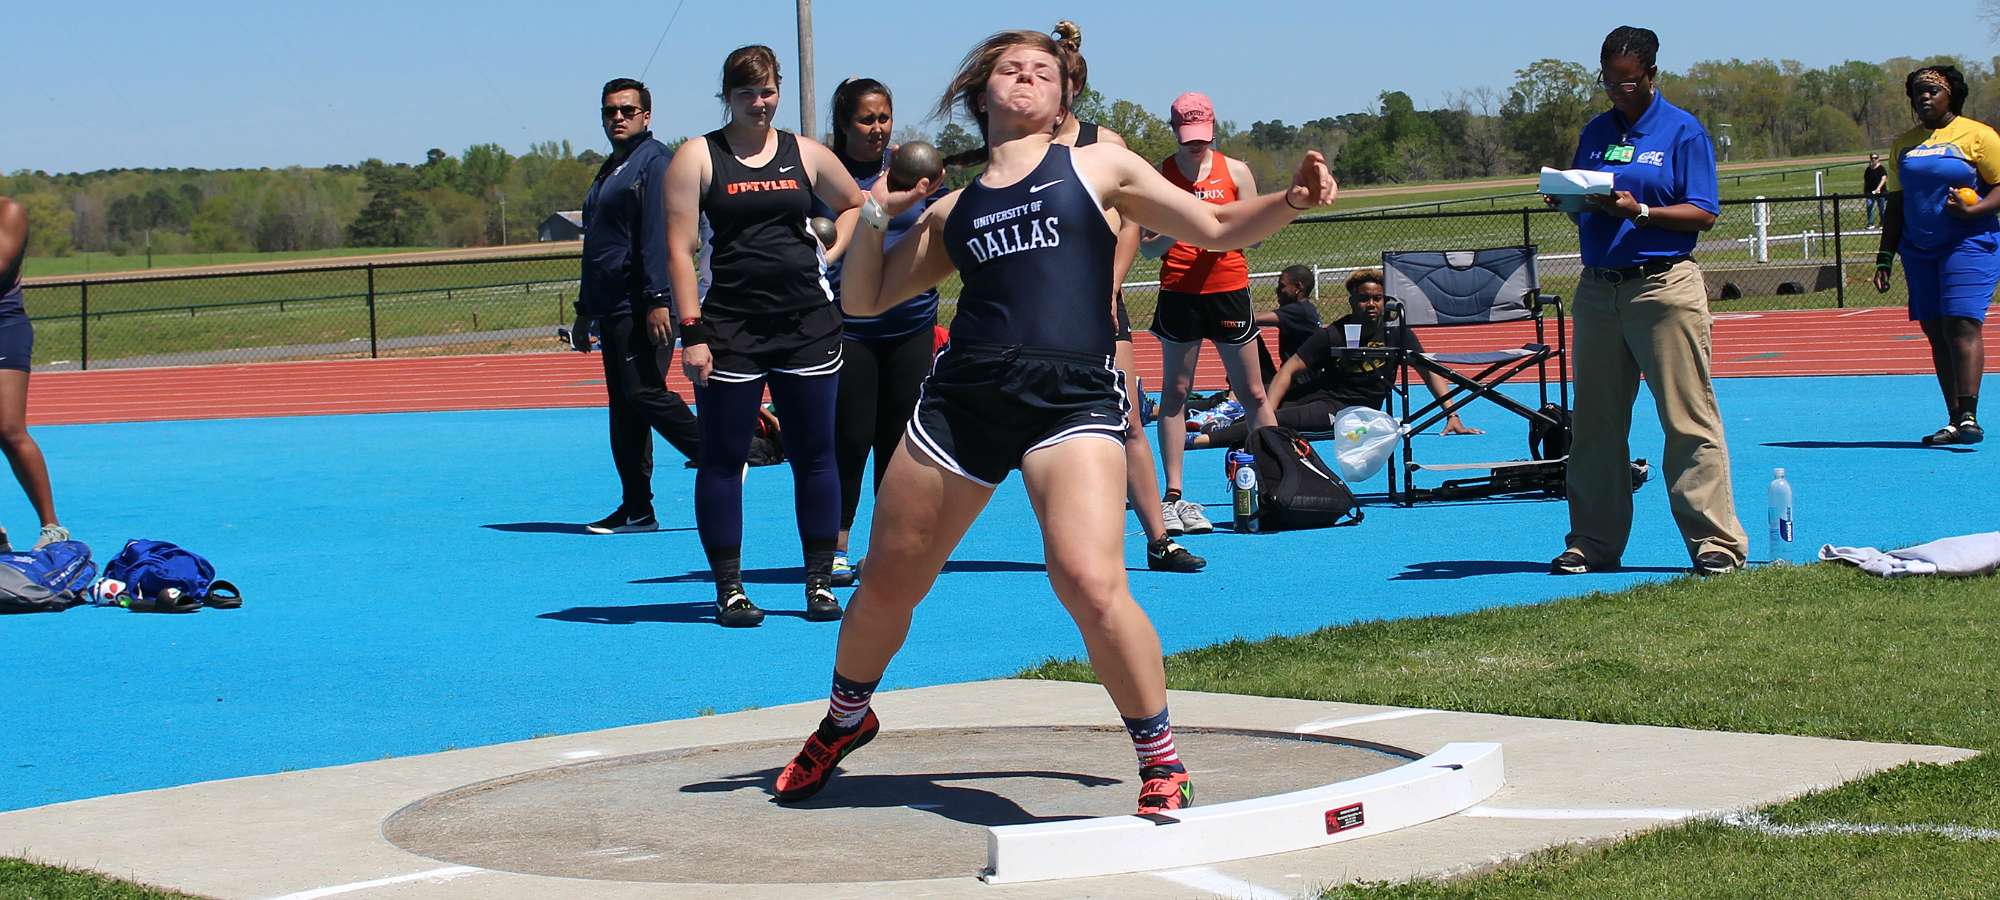 Hassink leads Crusaders with 1st Place Finish on Shot Put PR. Several others landed PR marks.